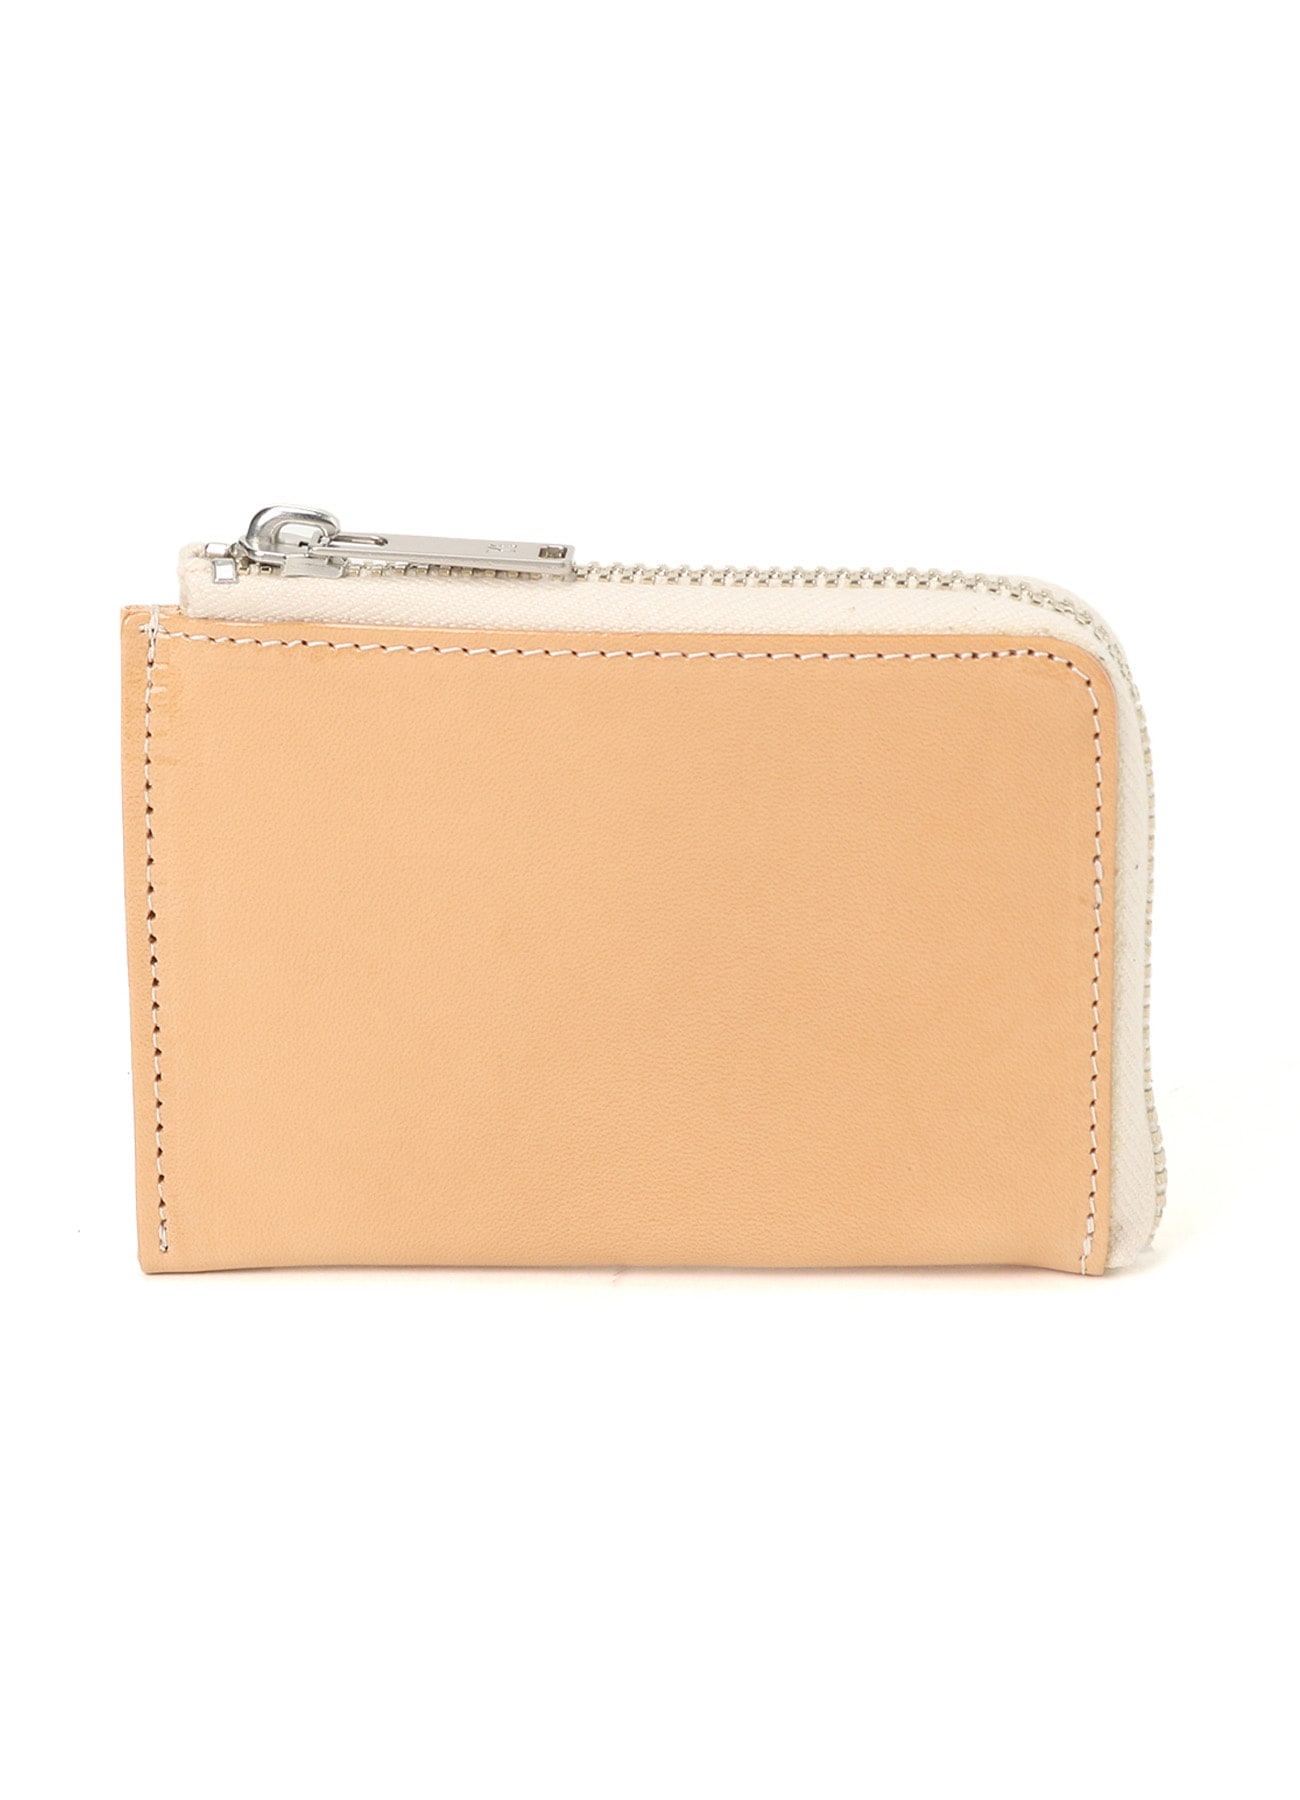 TANNED/ENAMEL-COATED LEATHER ZIPPERED CARD CASE